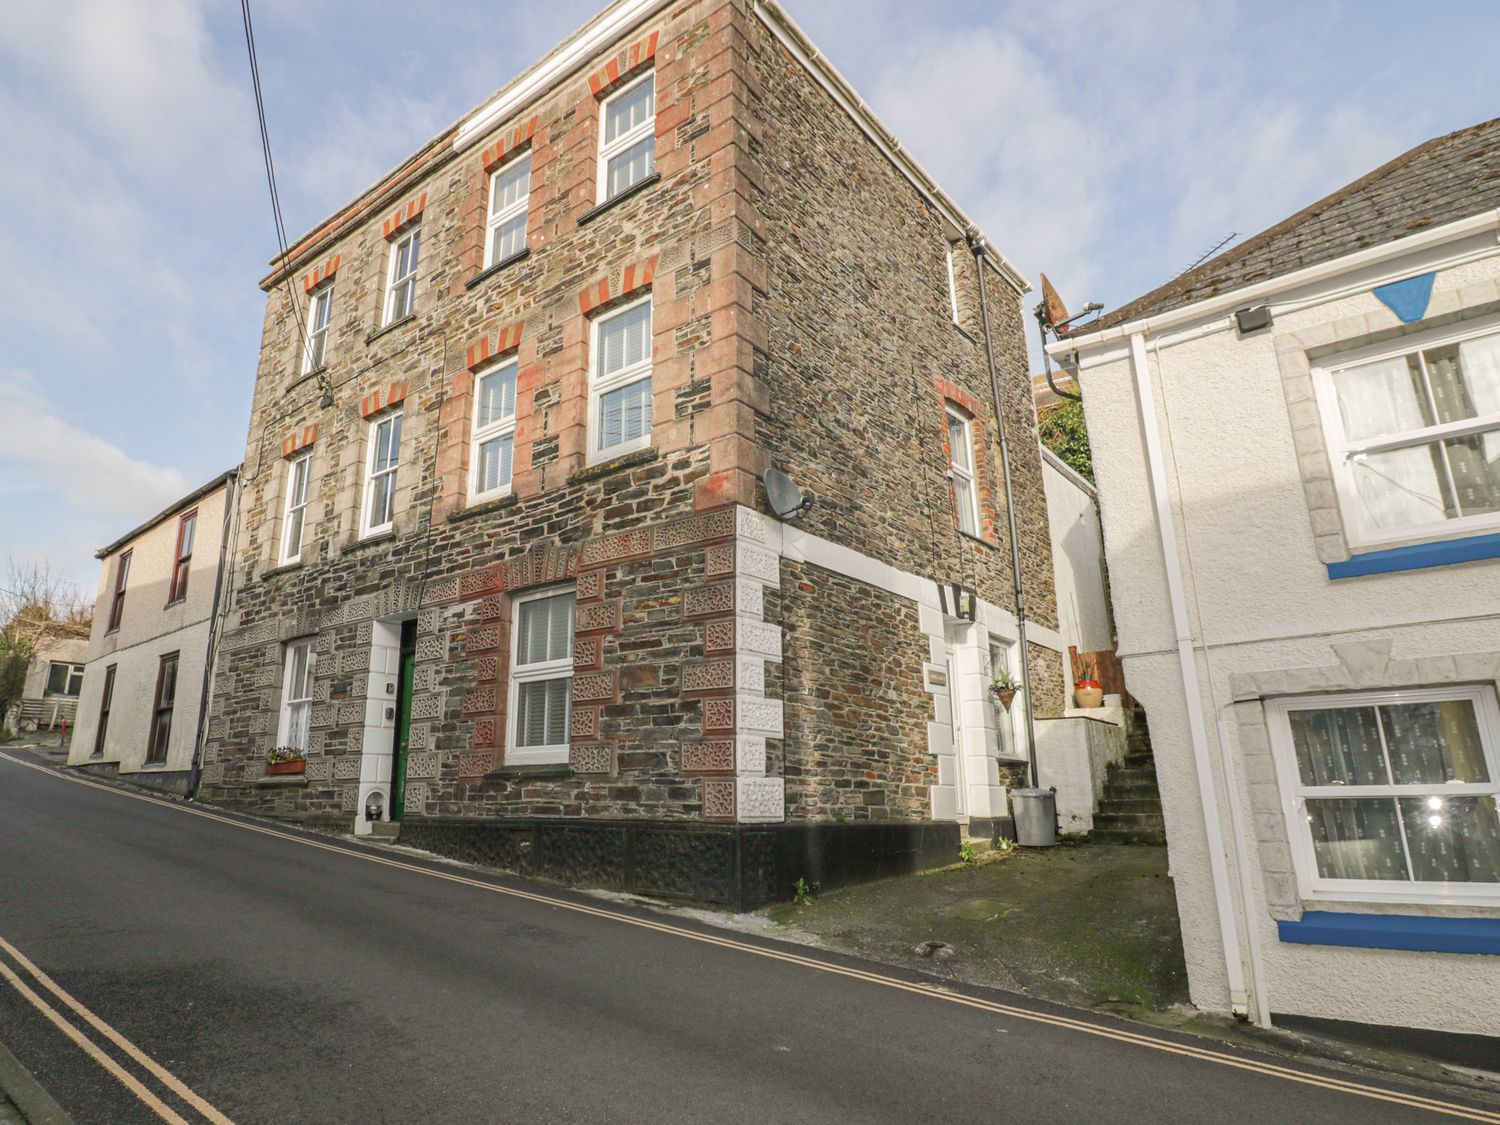 Dreckly Cottage - Cornwall - 1018835 - photo 1